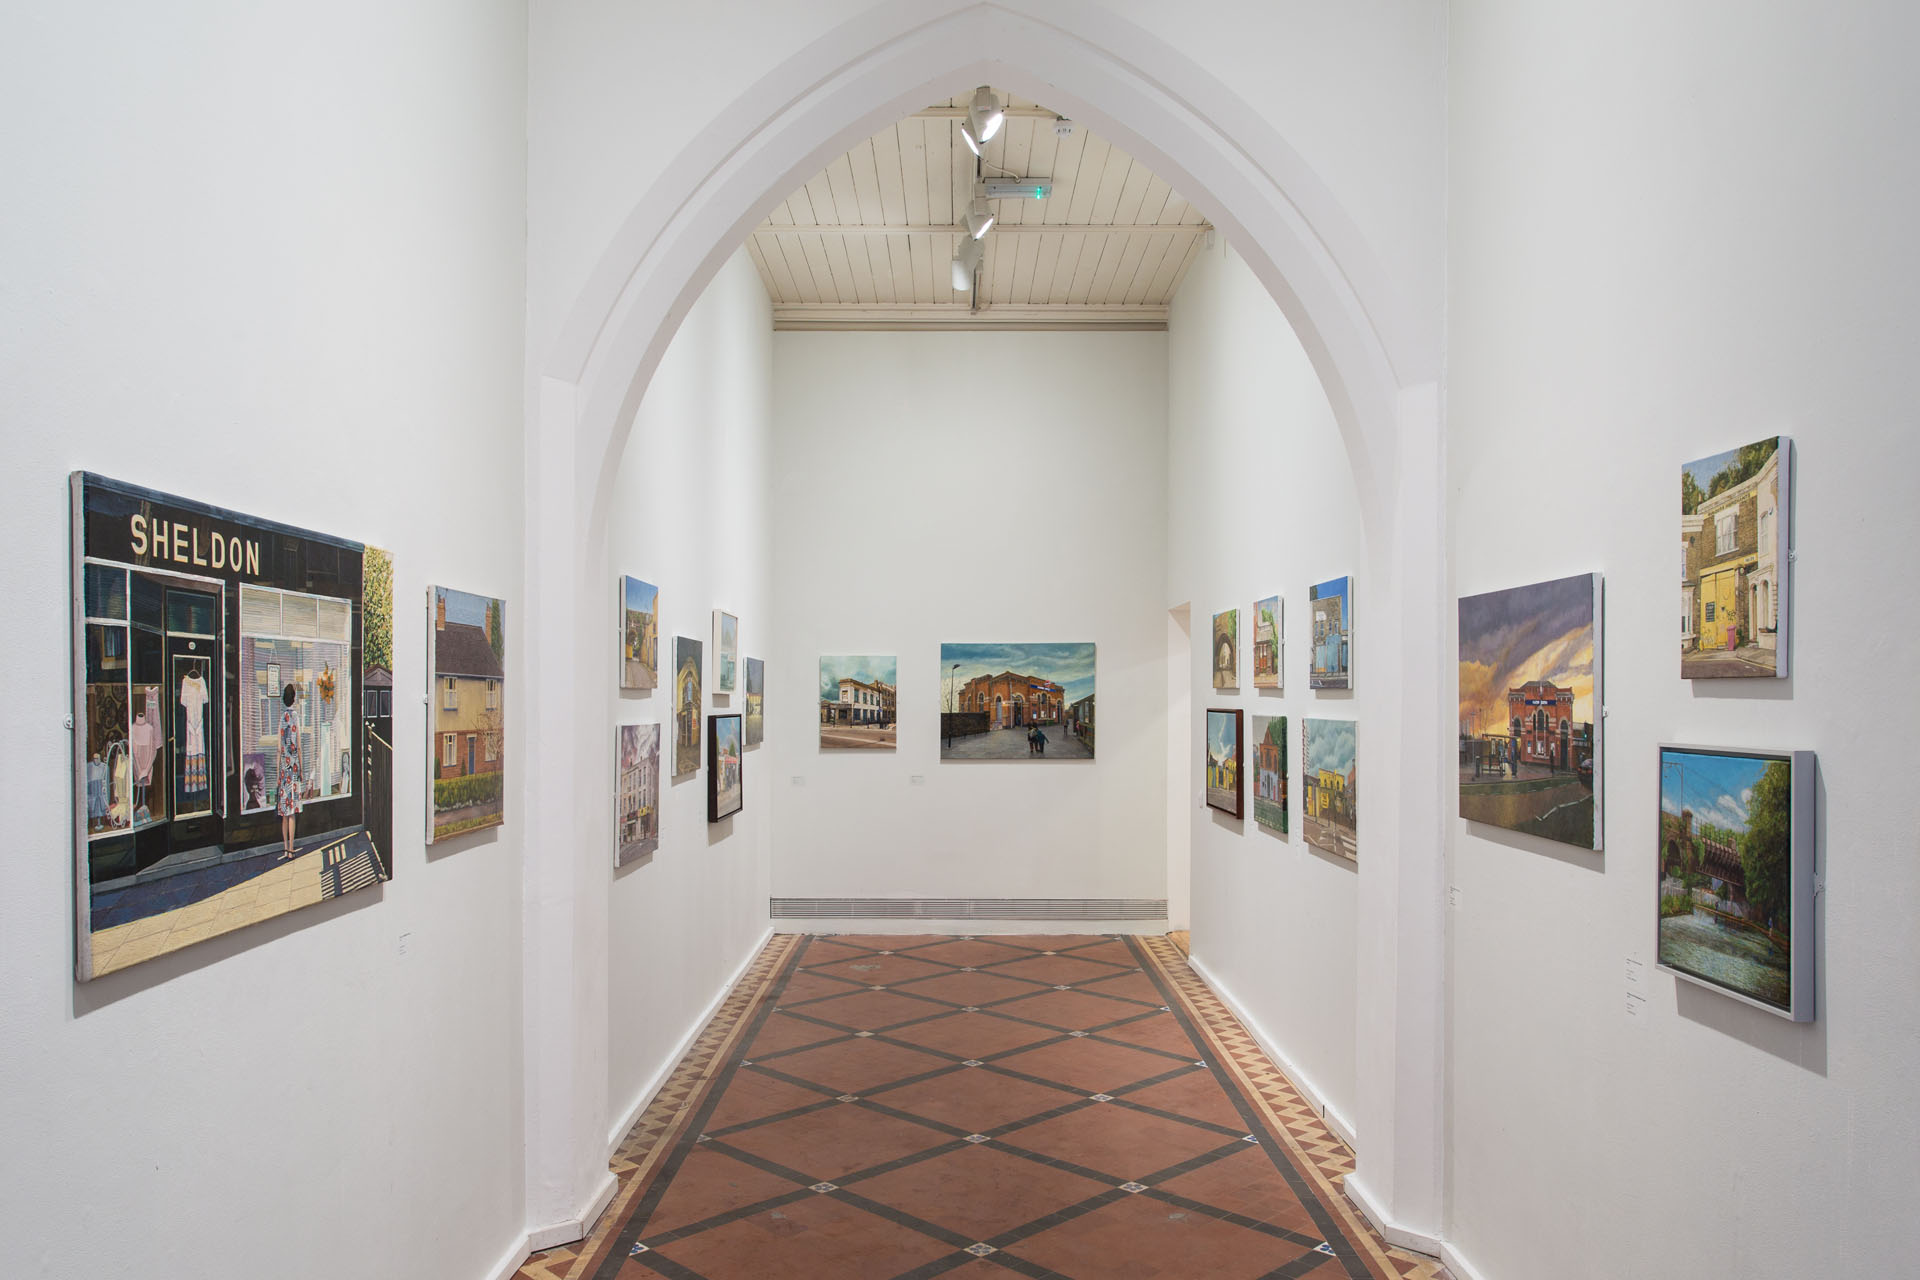 The nave space of the Nunnery Gallery featuring paintings by Doreen Fletcher of east London streets and buildings